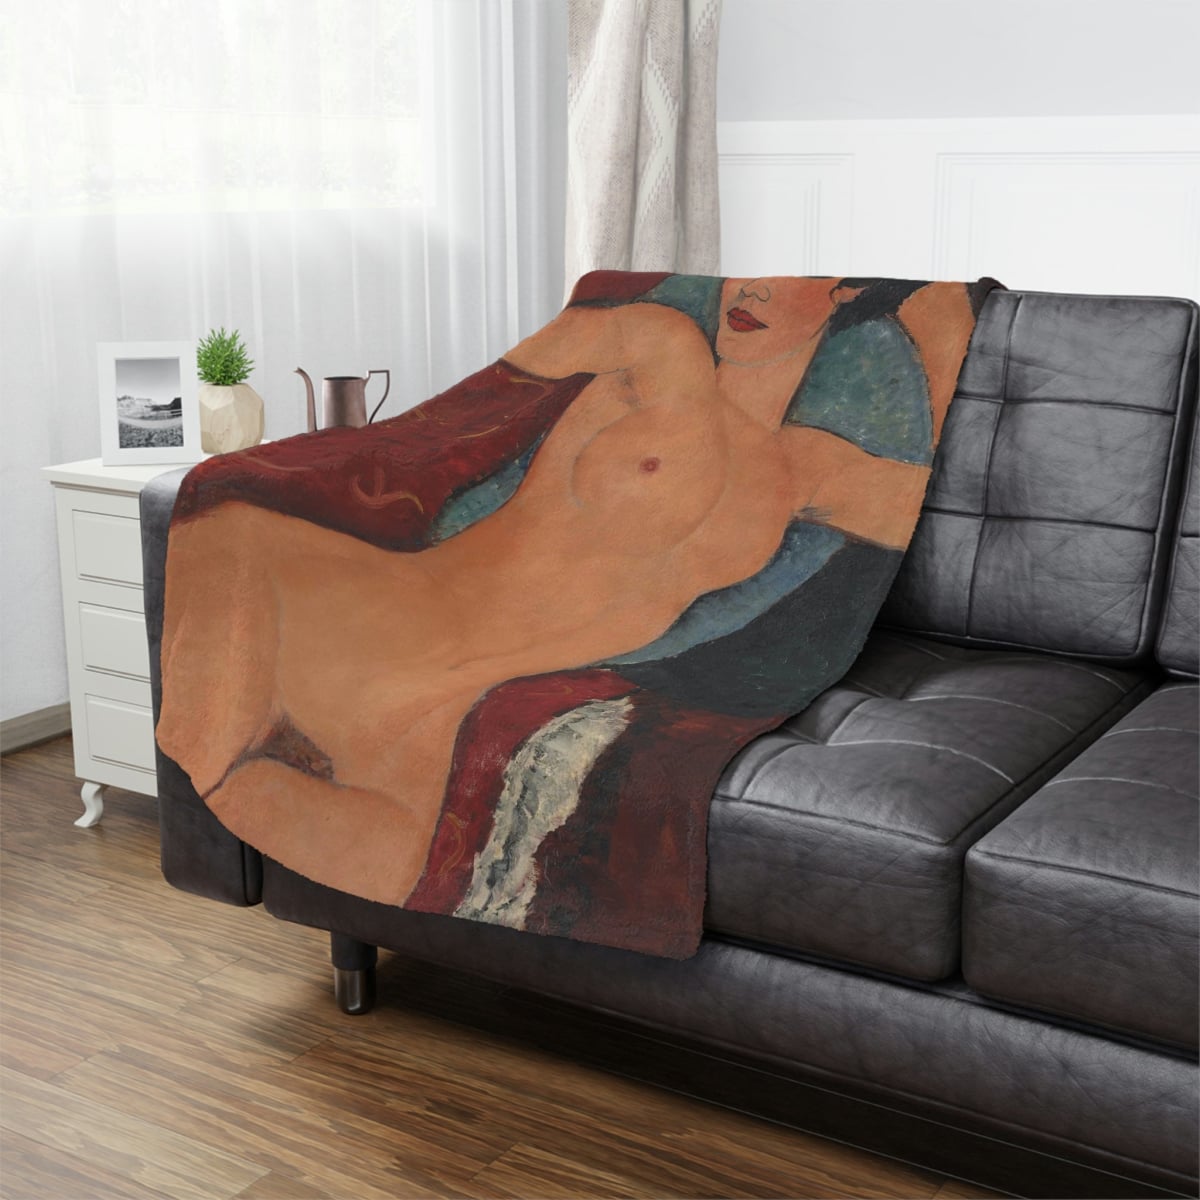 Elegant home decor featuring the 'Nu couché' by Amedeo Modigliani Art Blanket